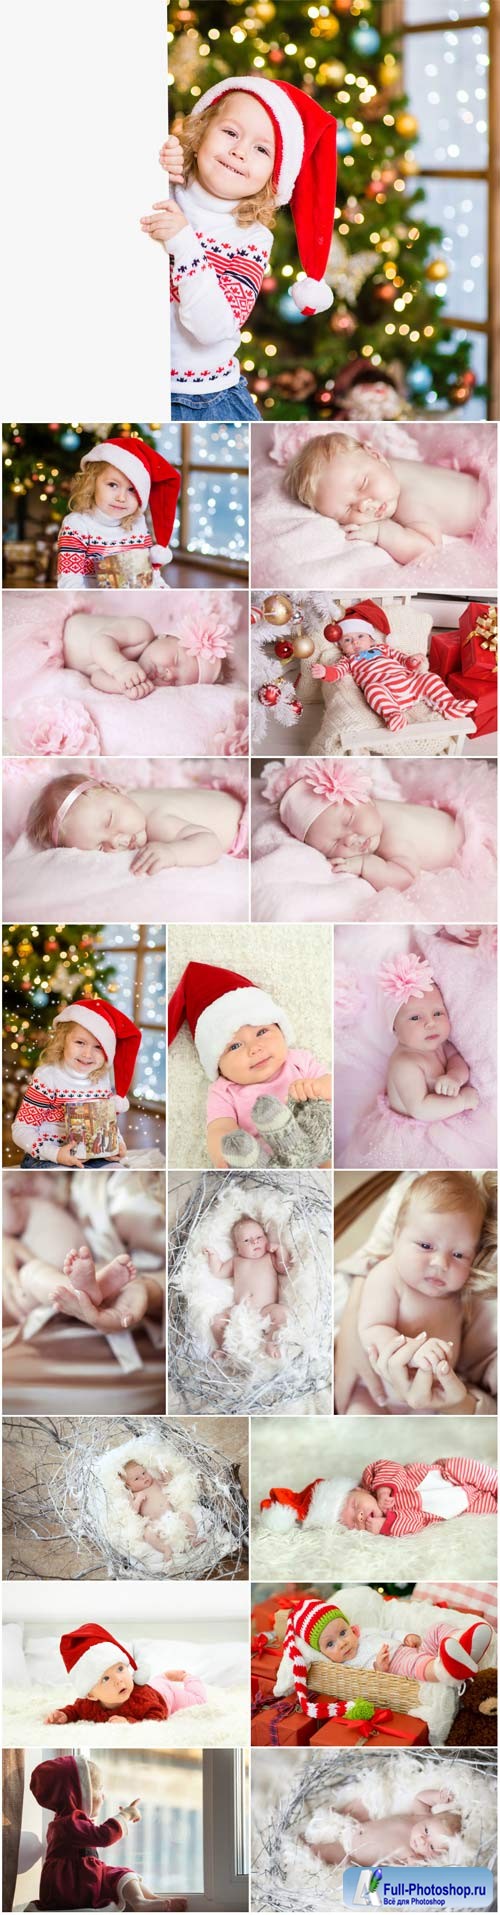 New Year and Christmas stock photos 60